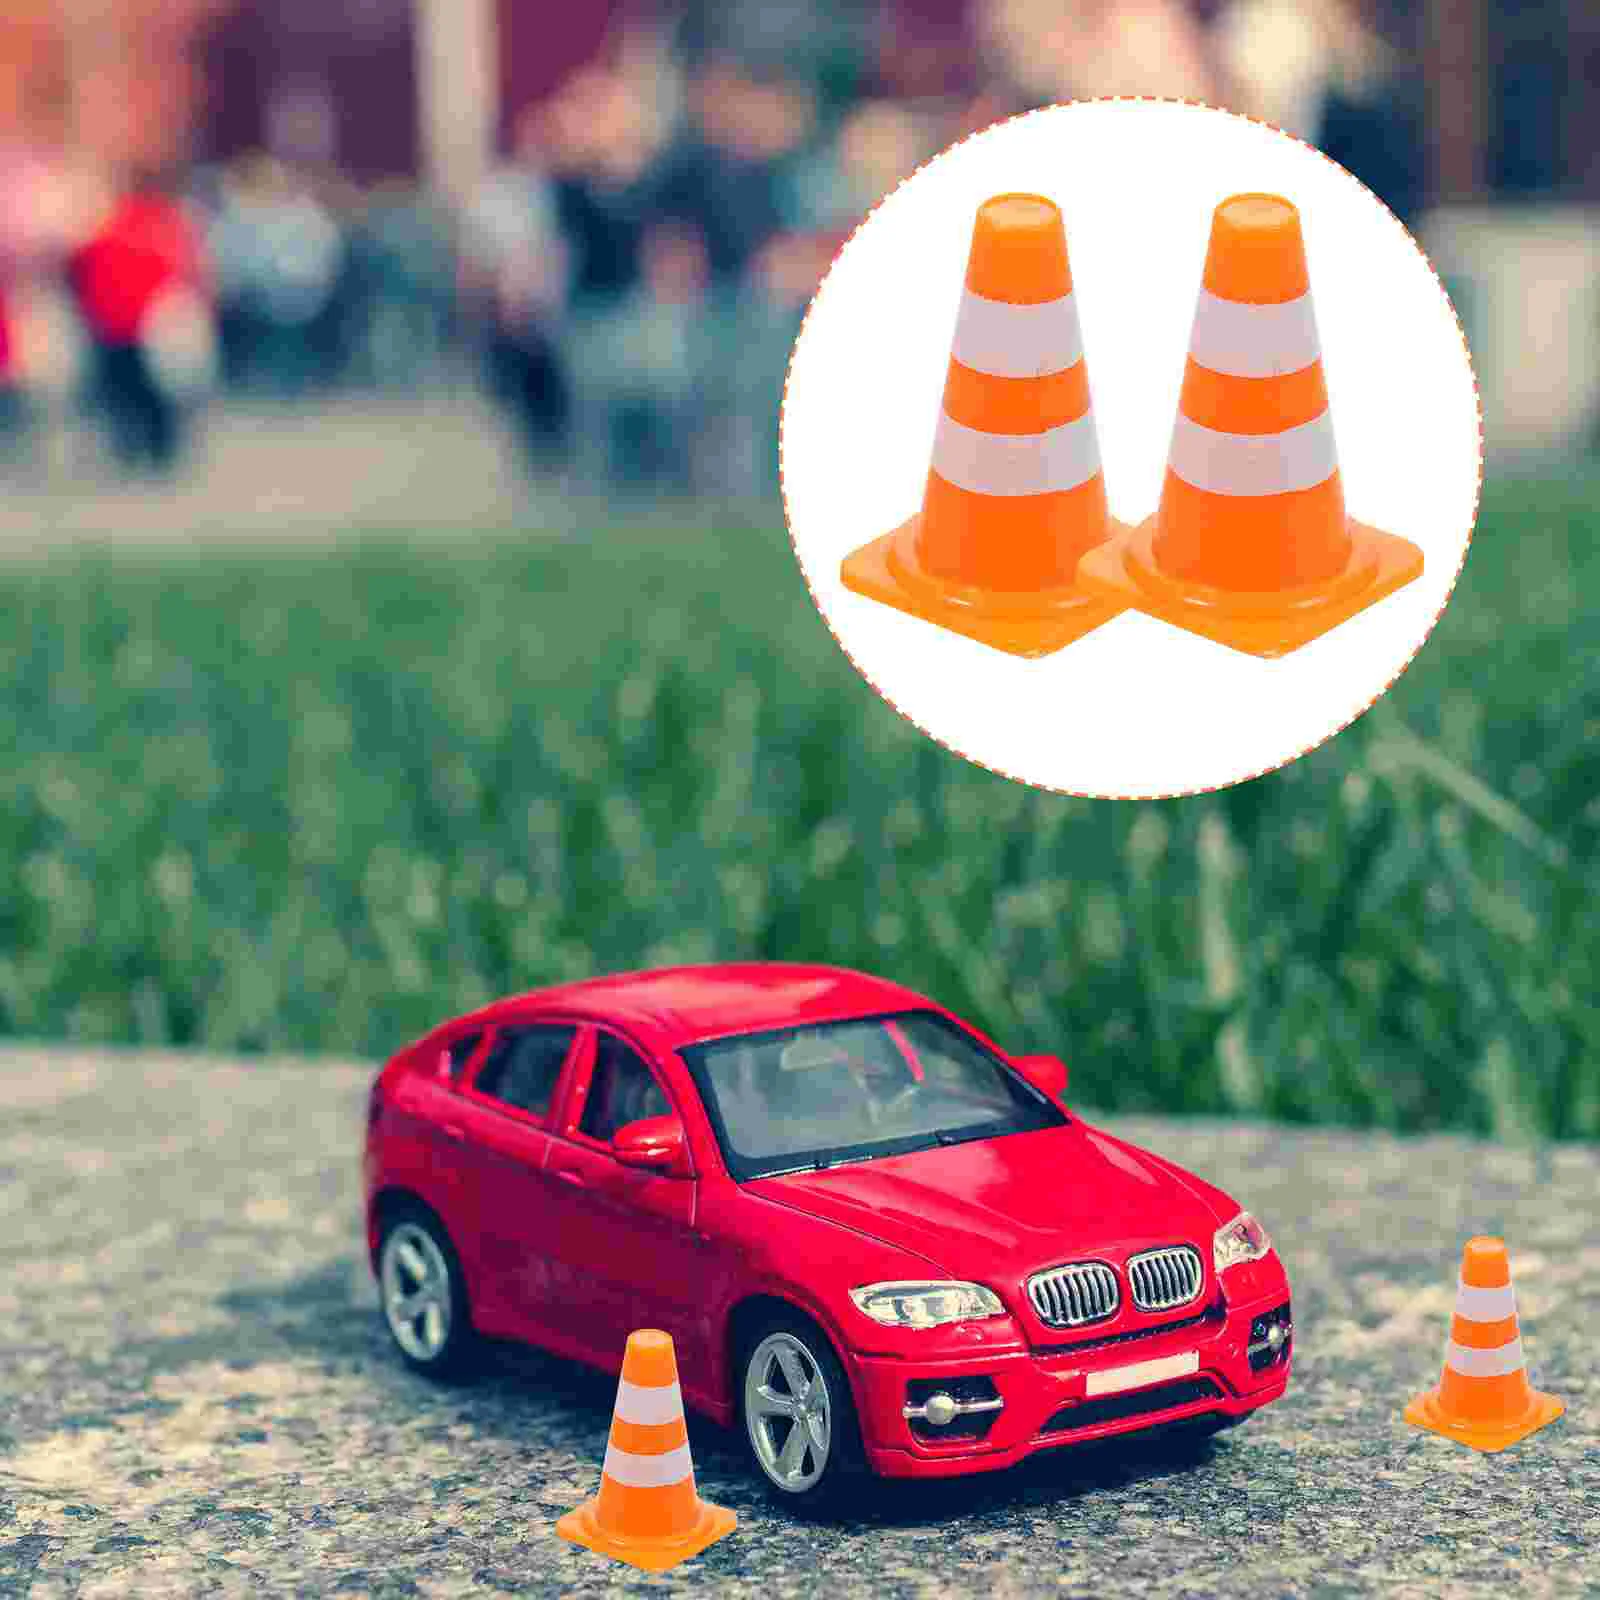 

50 Pcs Miniatures Roadblock Simulation Props Educational Toy Traffic Scene Toys Cone Kids Street Signs Children Plaything